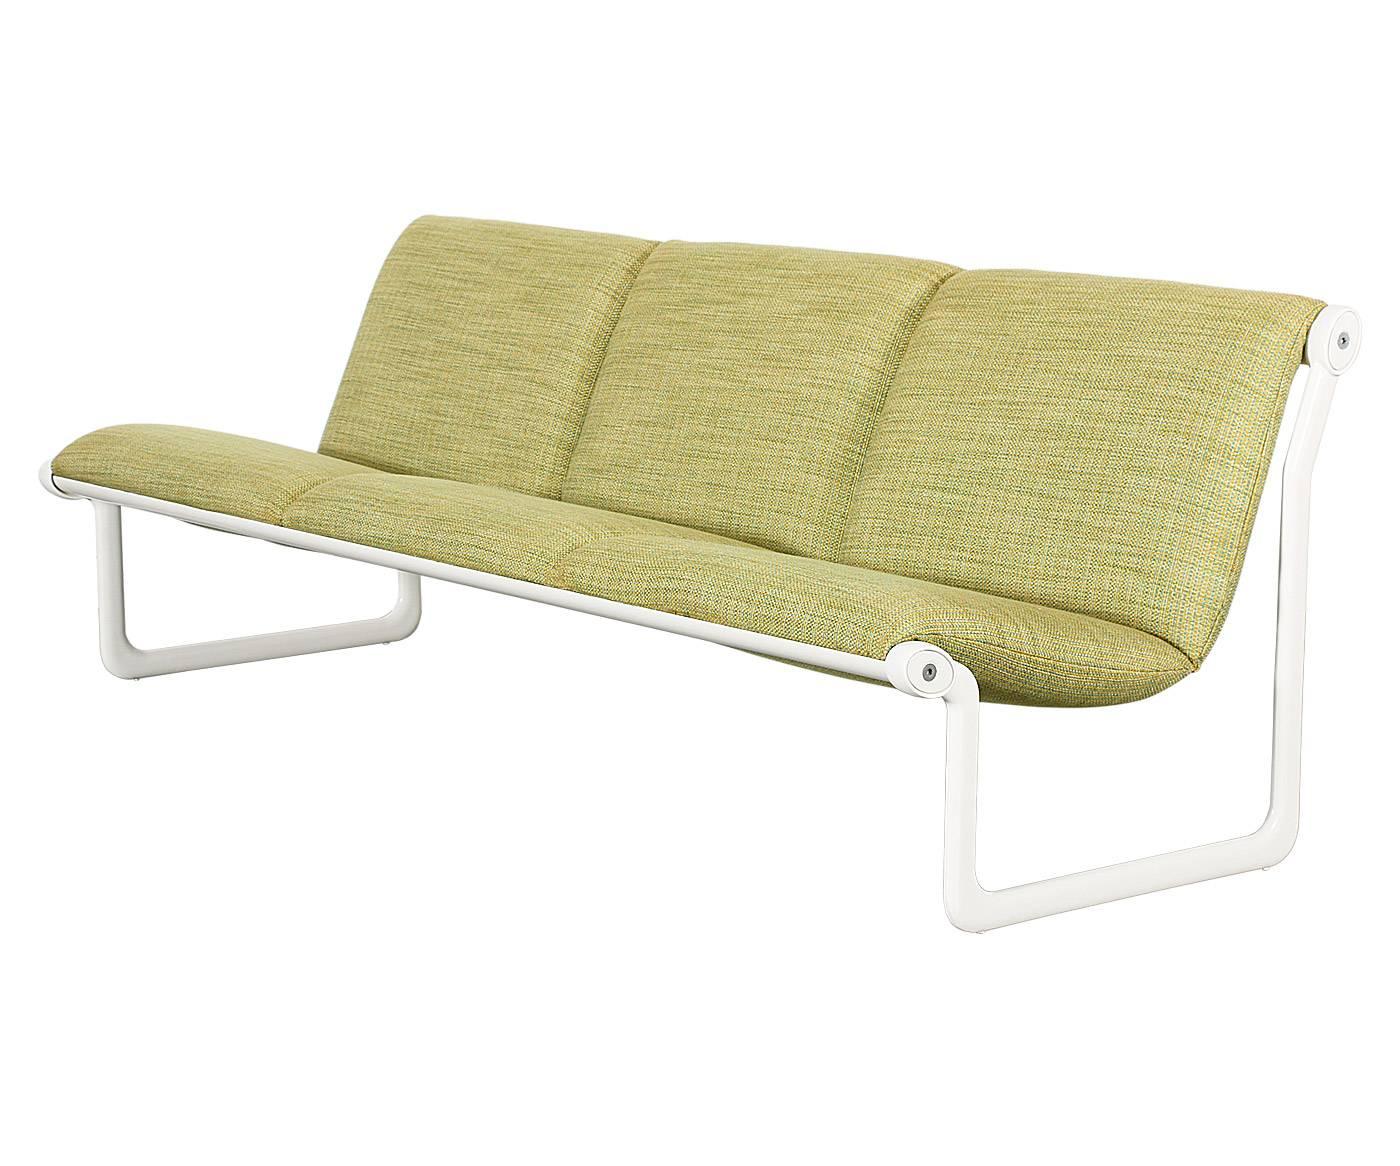 Designer: Hannah Morrison.
Manufacturer: Knoll International.
Period/style: Mid-Century Modern.
Country: United States.
Date: 1970s.

Dimensions: 28″ H x 80″ L x 27″ W.
Seat height 16.25″.
Materials: Lacquered steel and aluminum, cotton